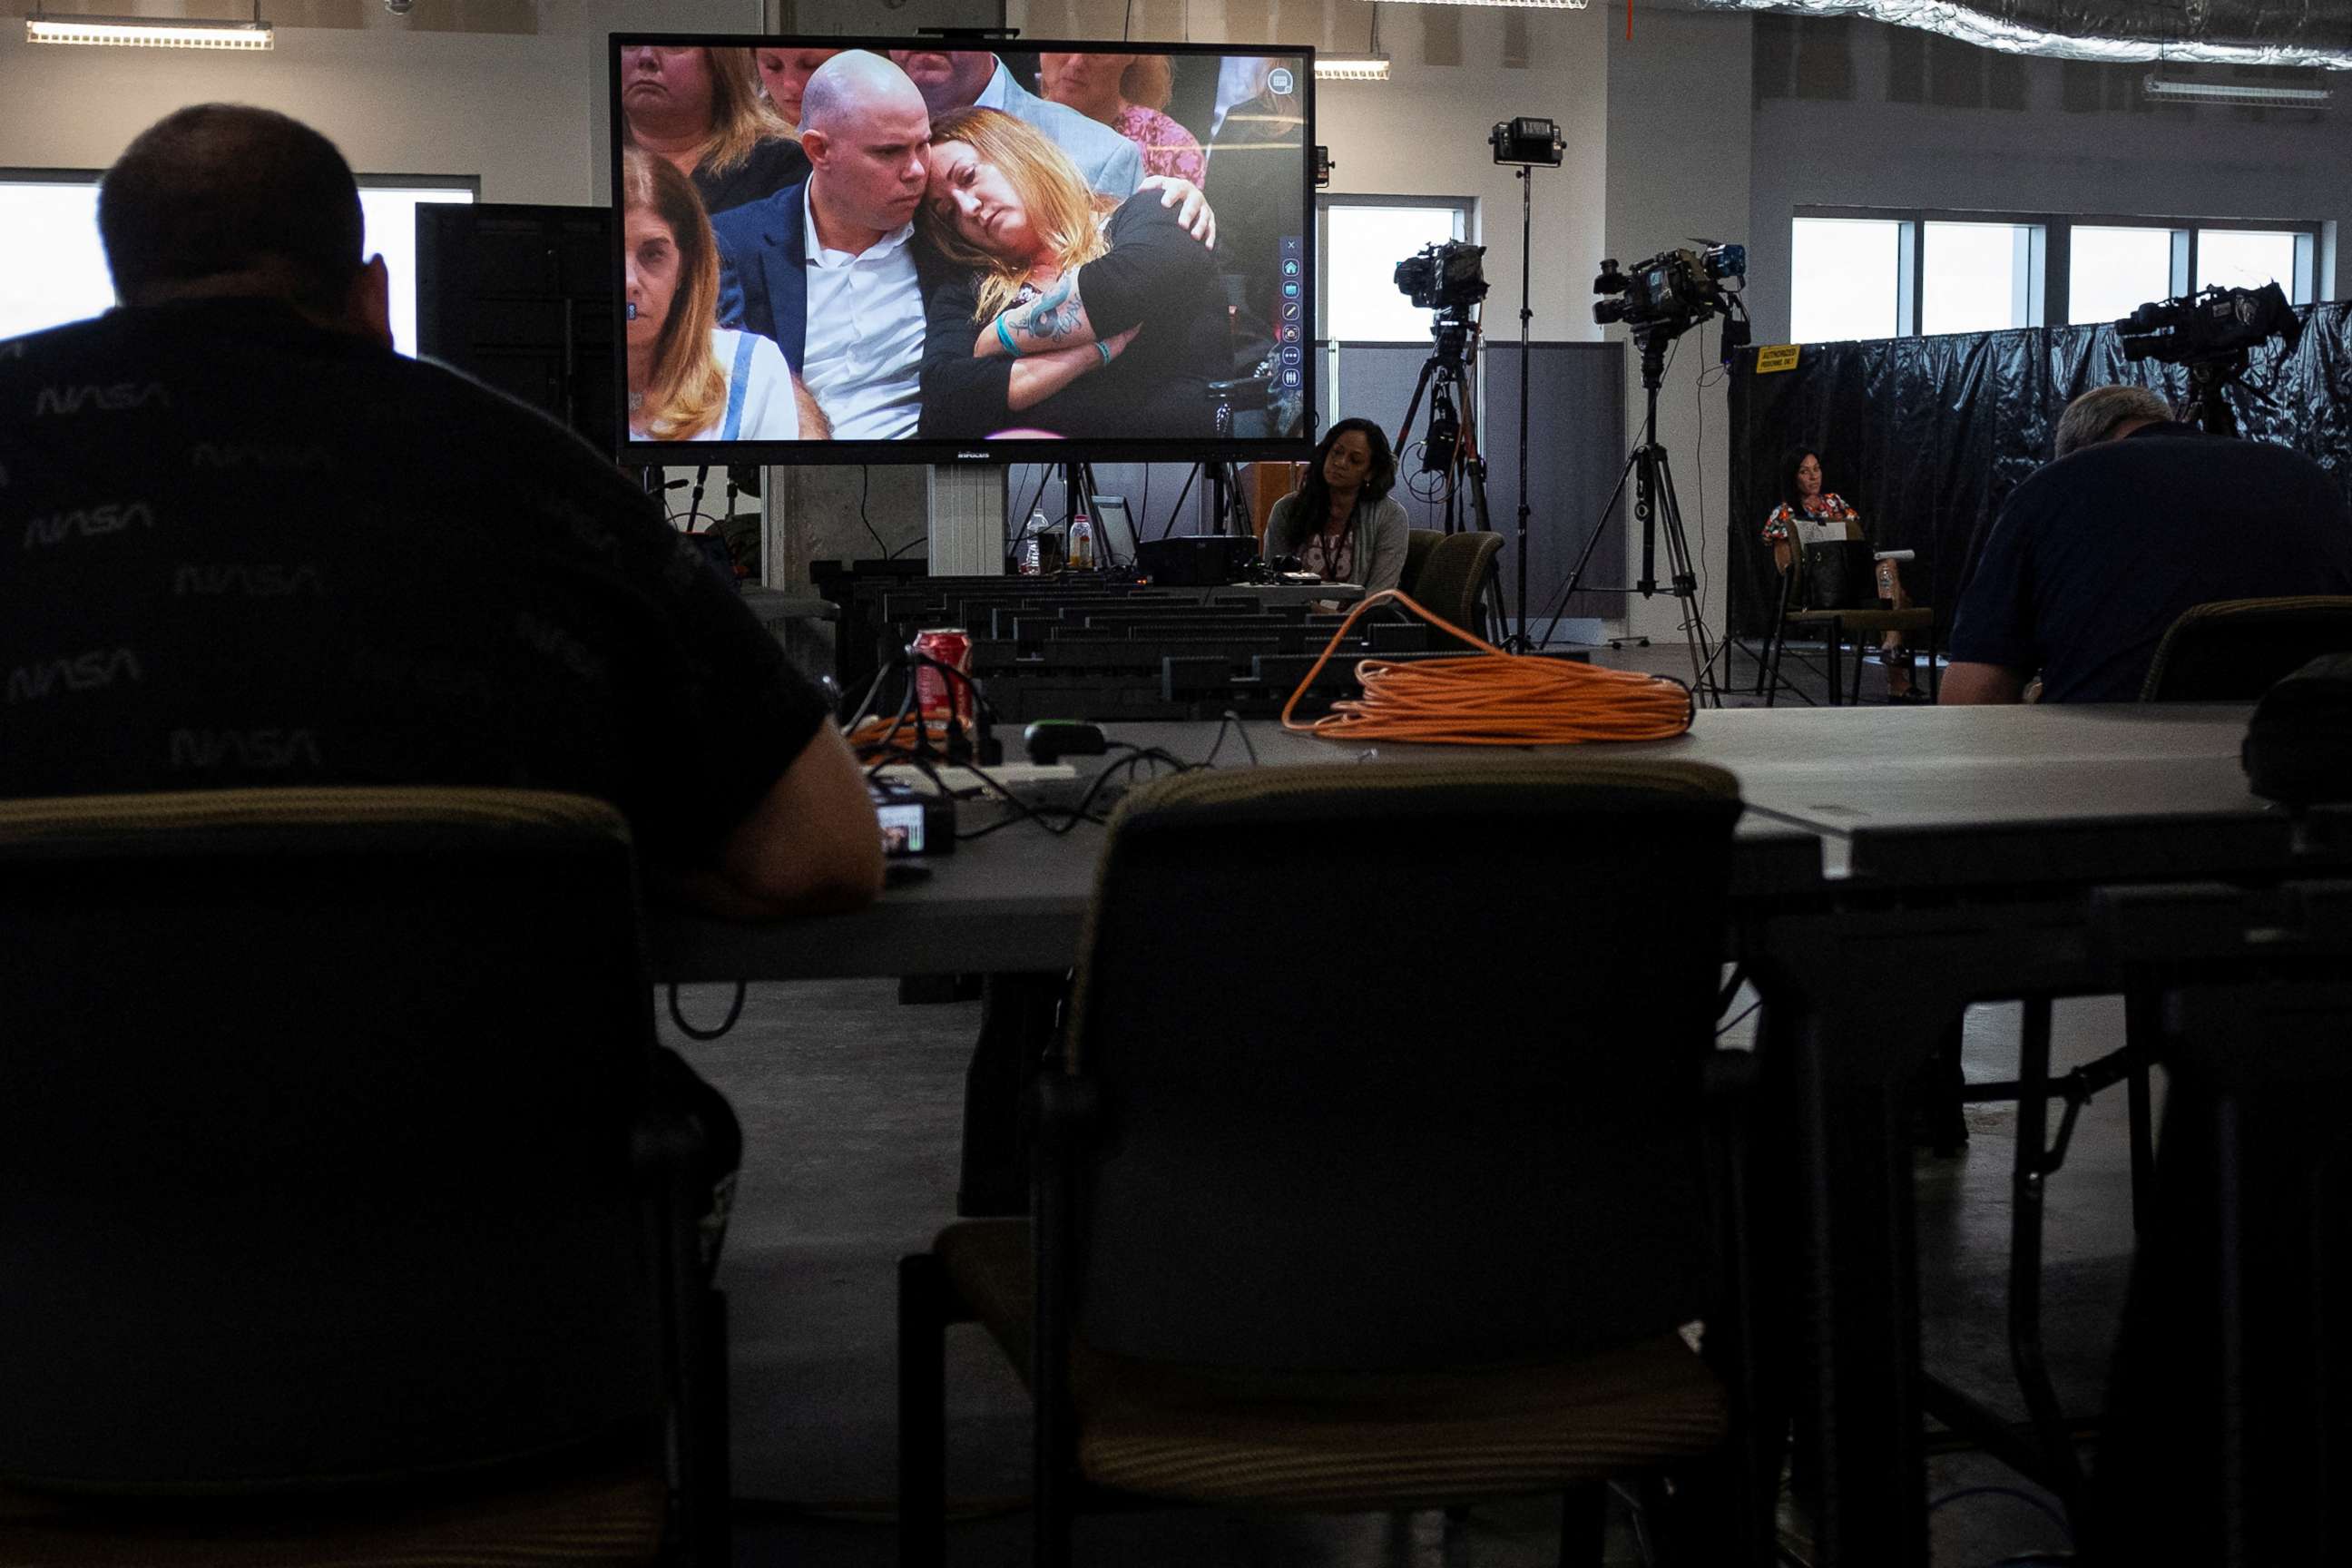 PHOTO:Relatives of MSD High School shooting victims are seen reacting on a TV screen in the media room as the judge reads the jury verdict in the penalty phase of the trial of shooter Nikolas Cruz at the Courthouse in Fort Lauderdale, Fla., Oct. 13, 2022.